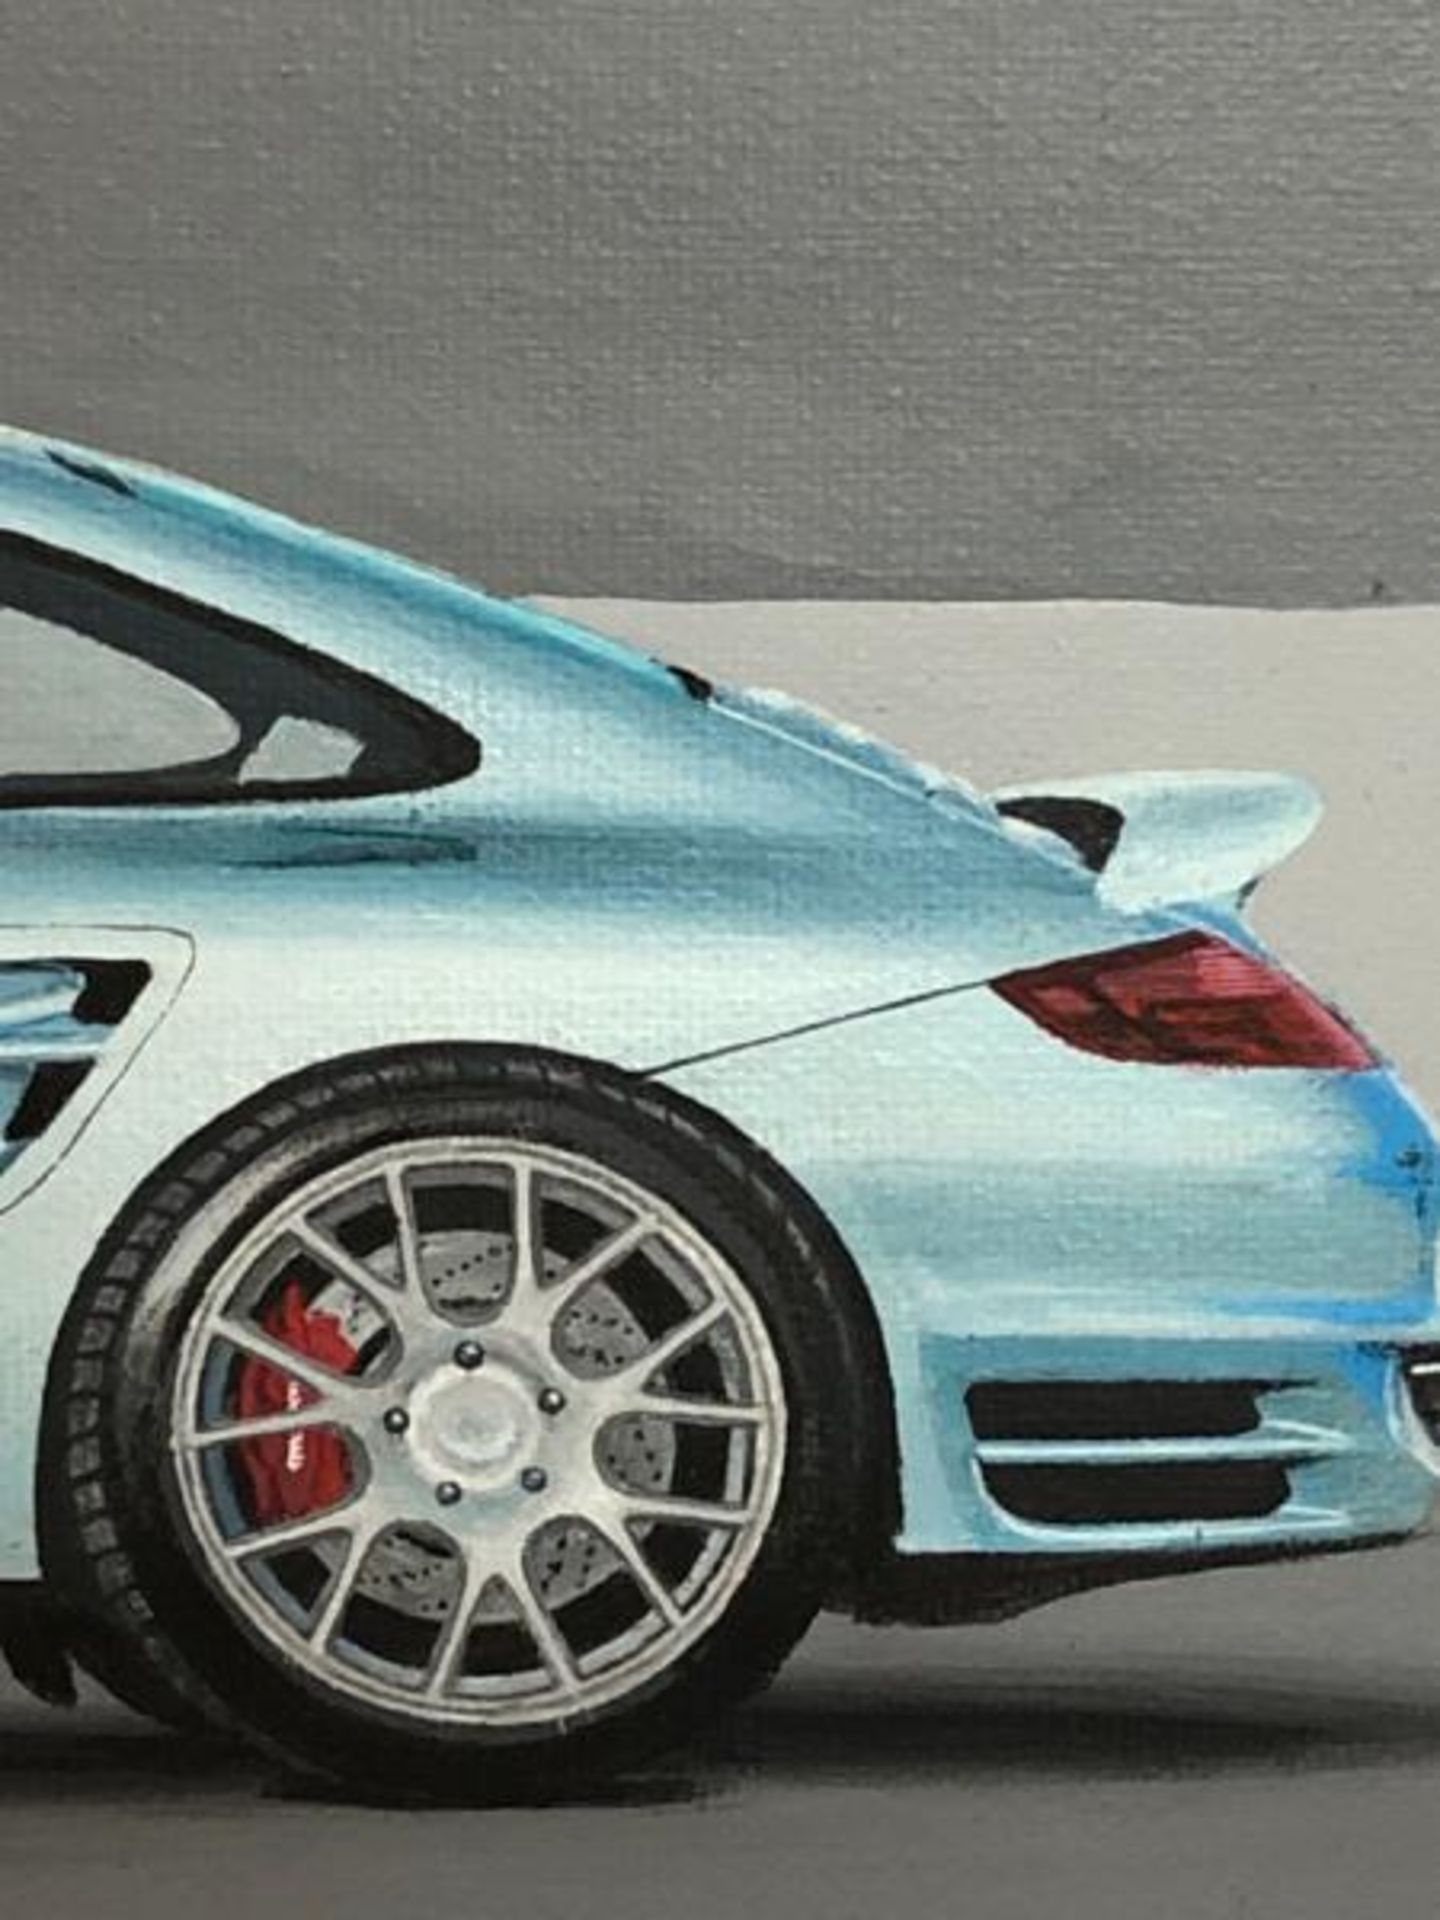 John Victor, "Metallic Blue Sky" (Porsche 911 Turbo) acrylic on canvas, signed with certificate, - Image 3 of 7